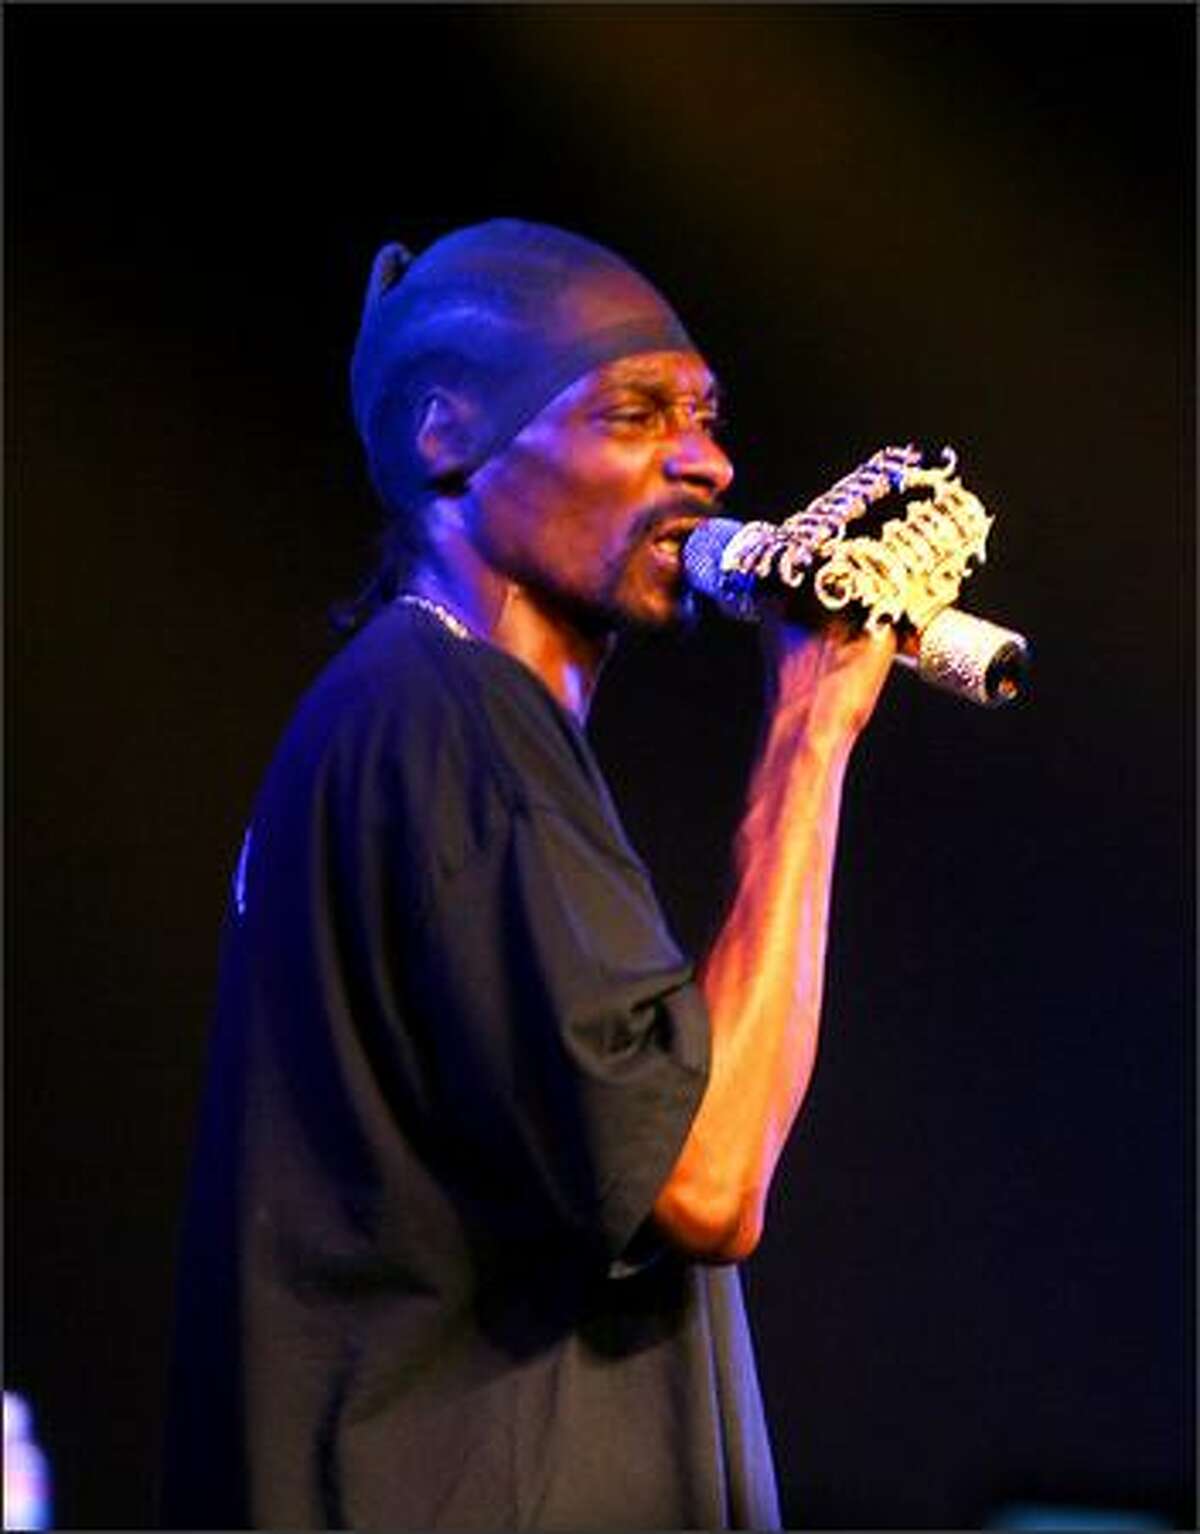 Rapper Snoop Dogg performs at Snoop Dogg's West Fest.